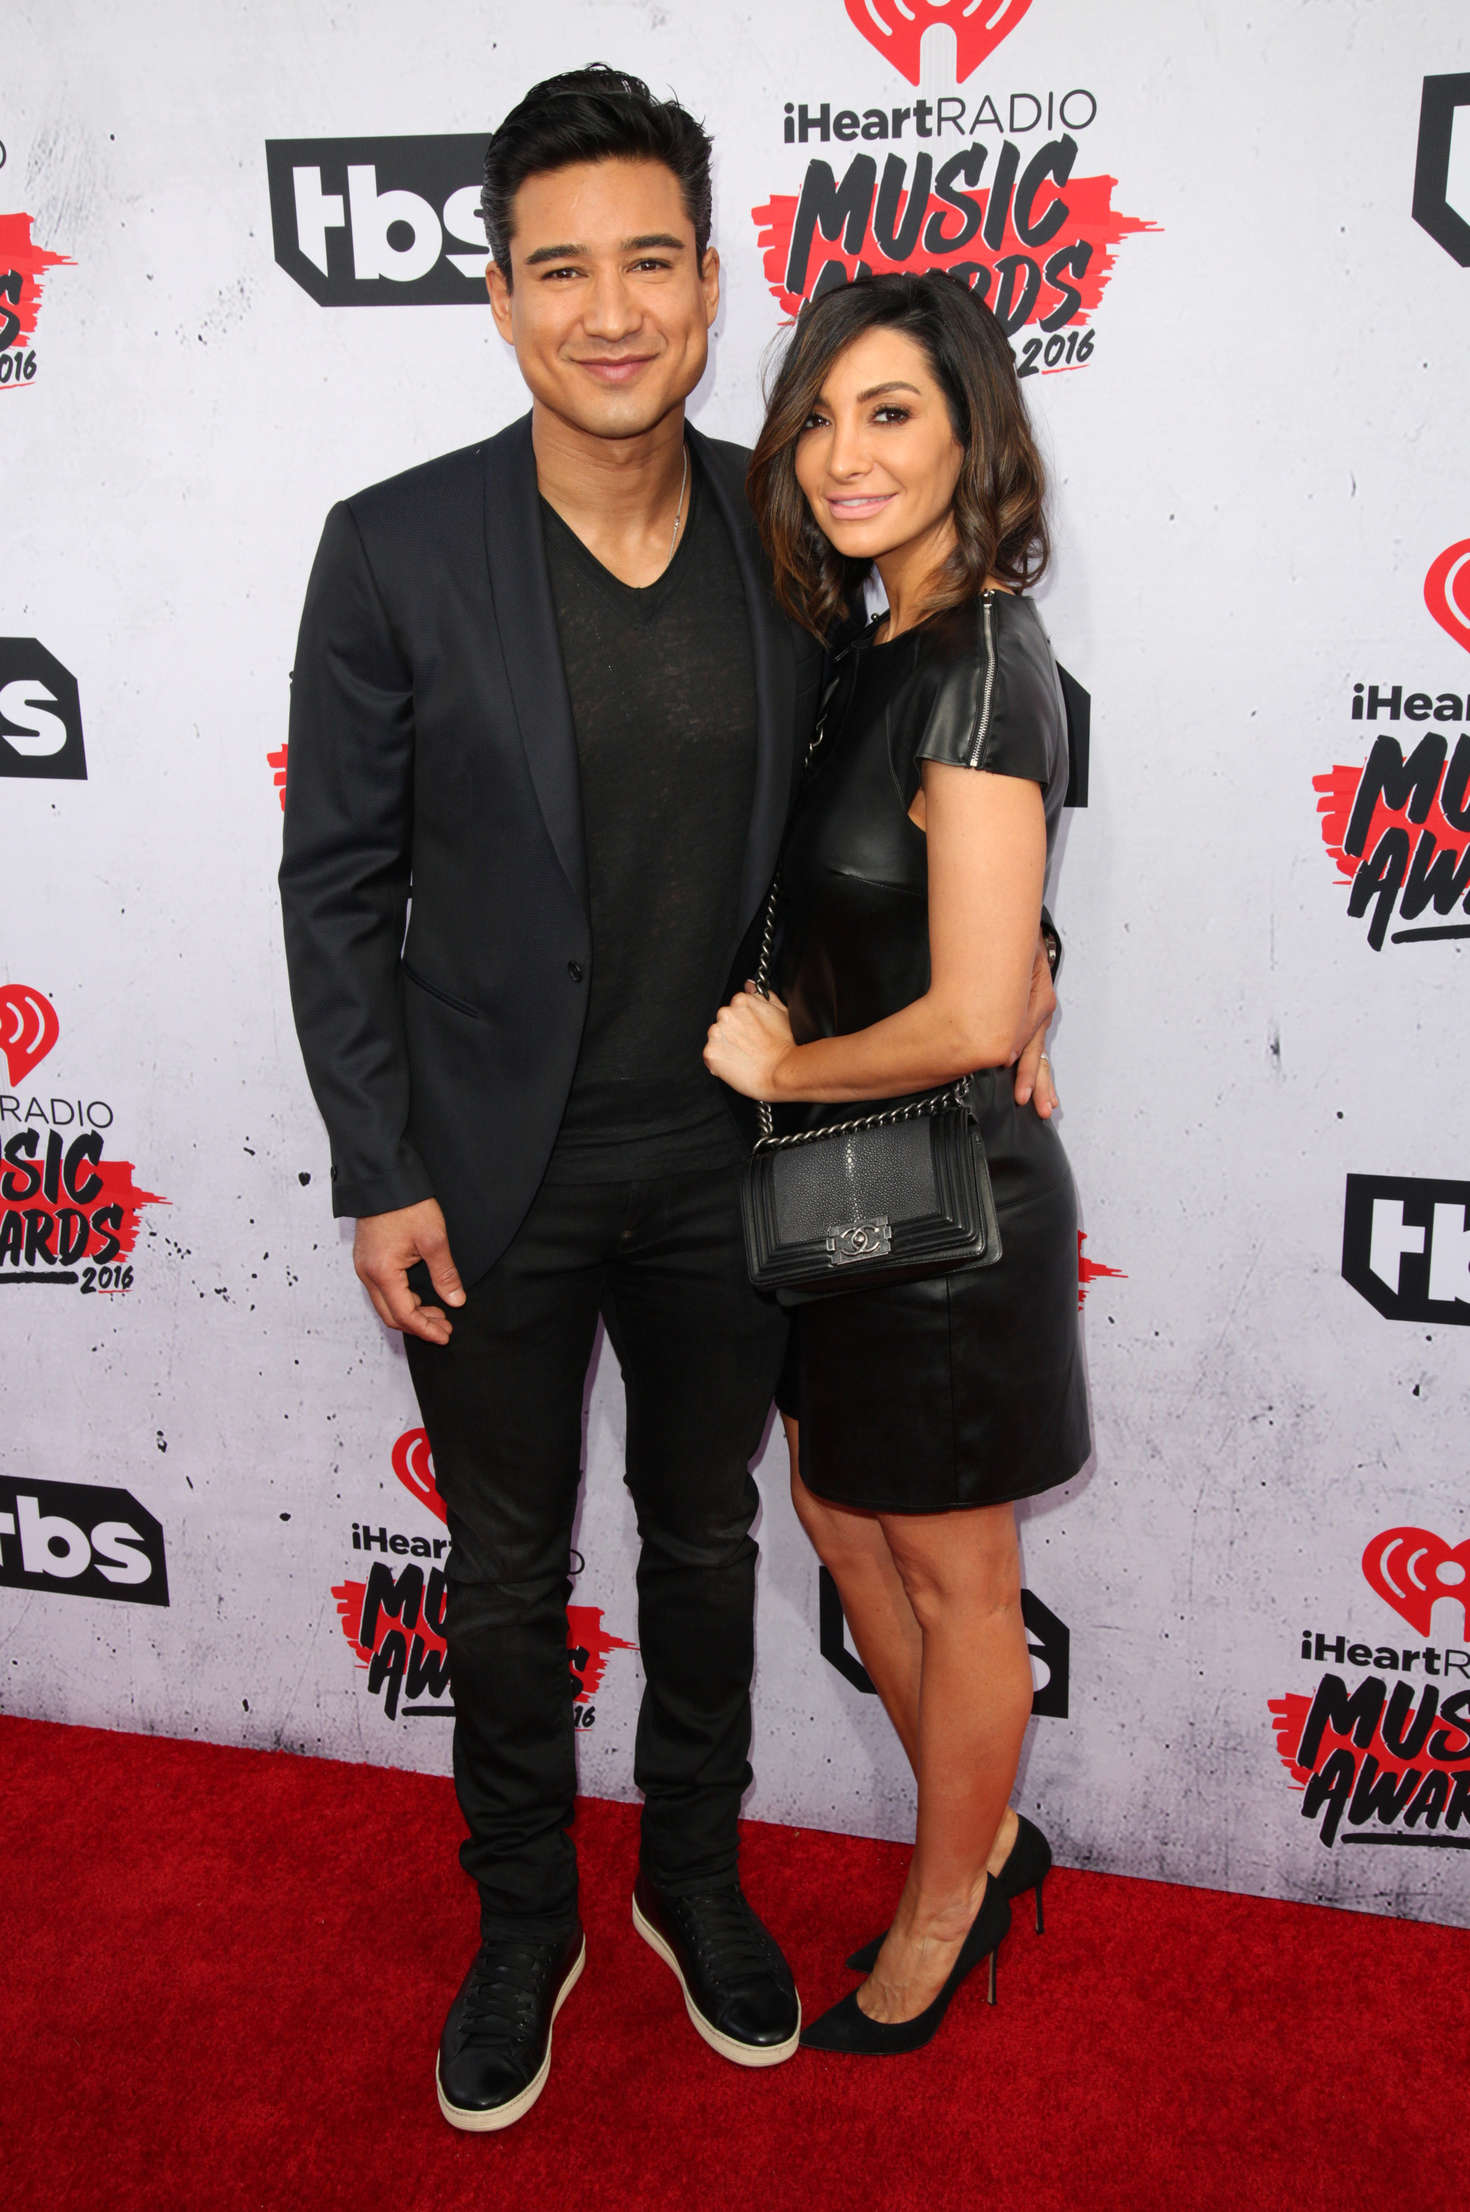 Courtney Mazza attends the iHeartRadio Music Awards